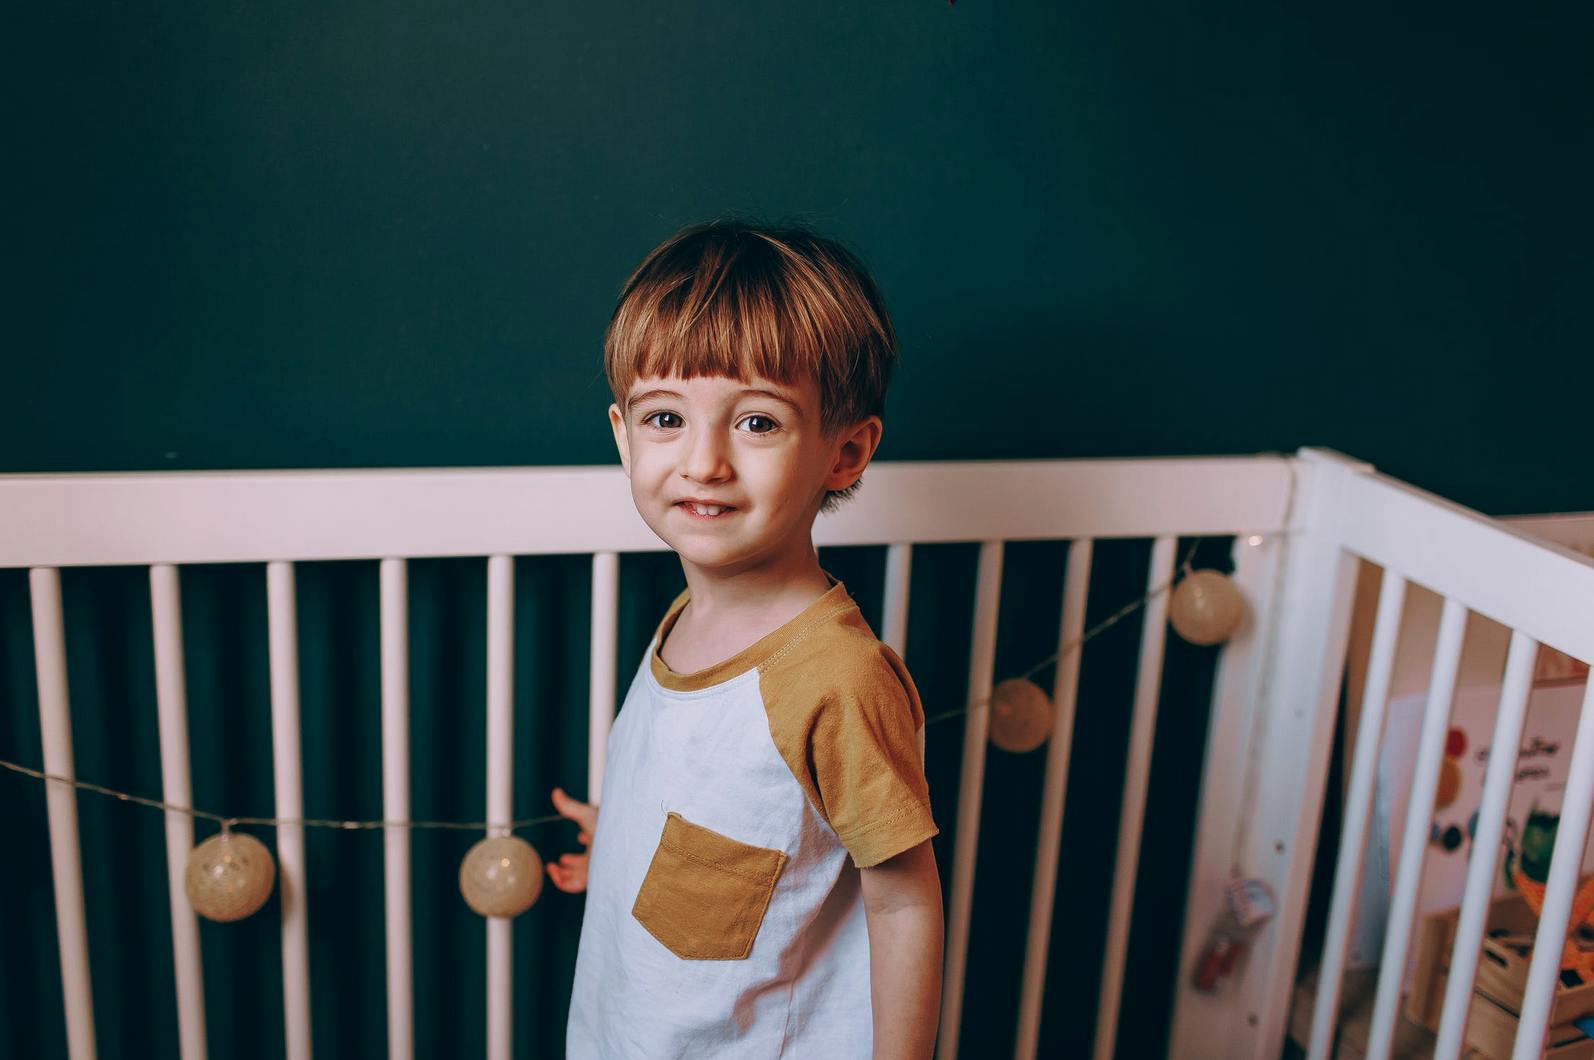 child standing in toddler bed, smiling